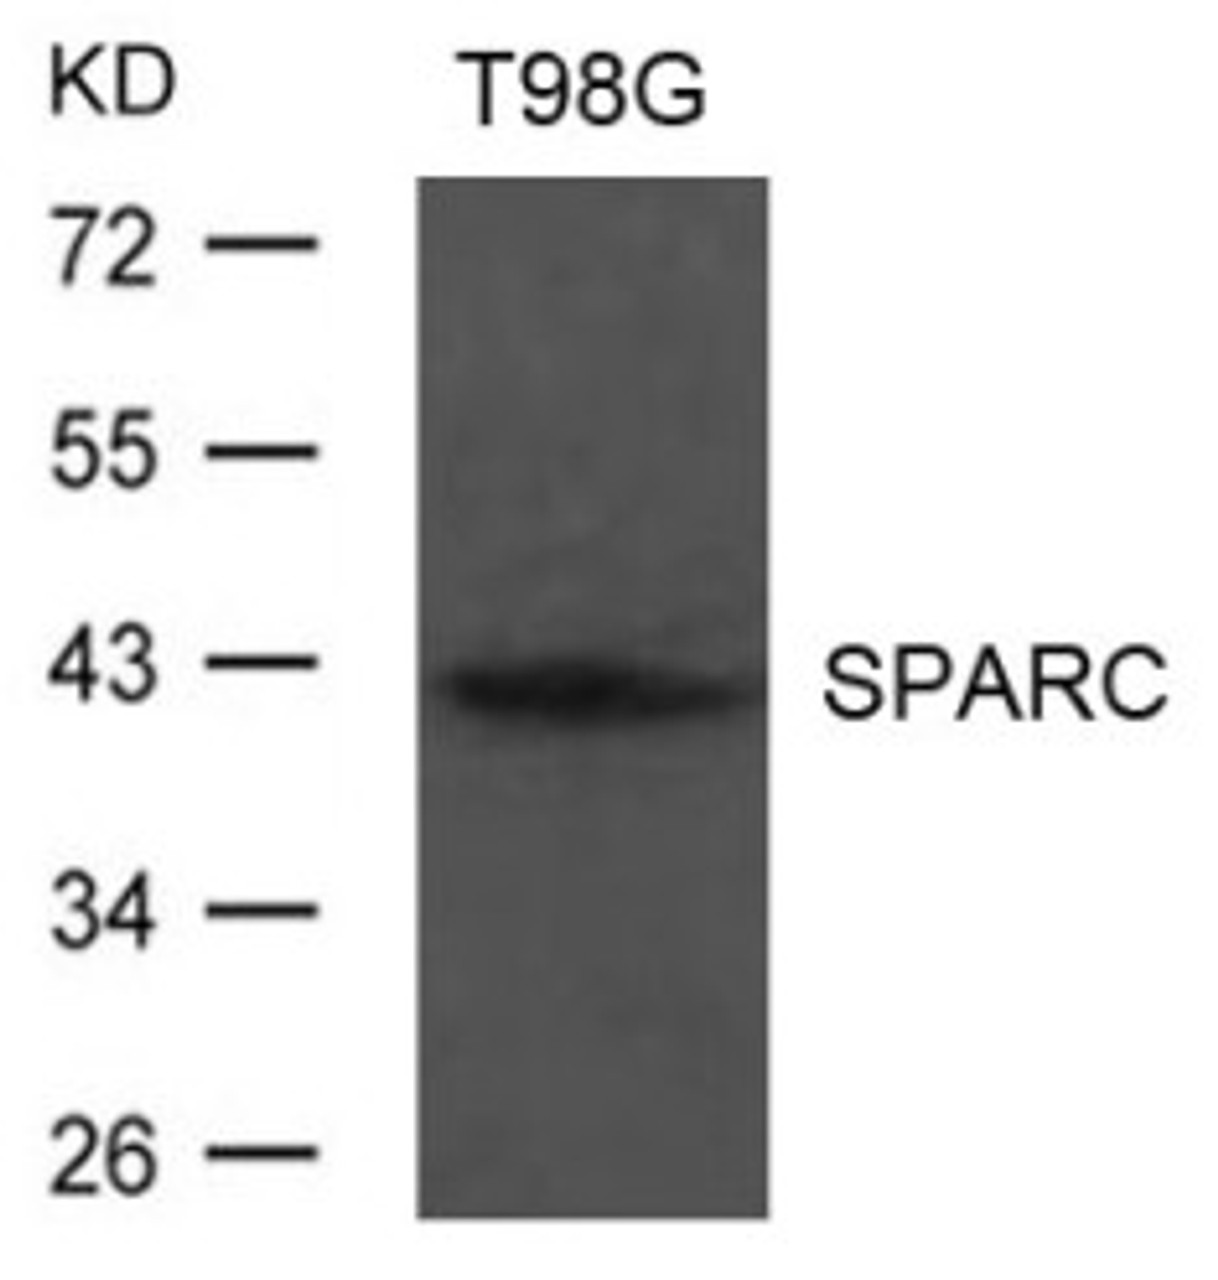 Western blot analysis of extract from T98G cells using SPARC Antibody.